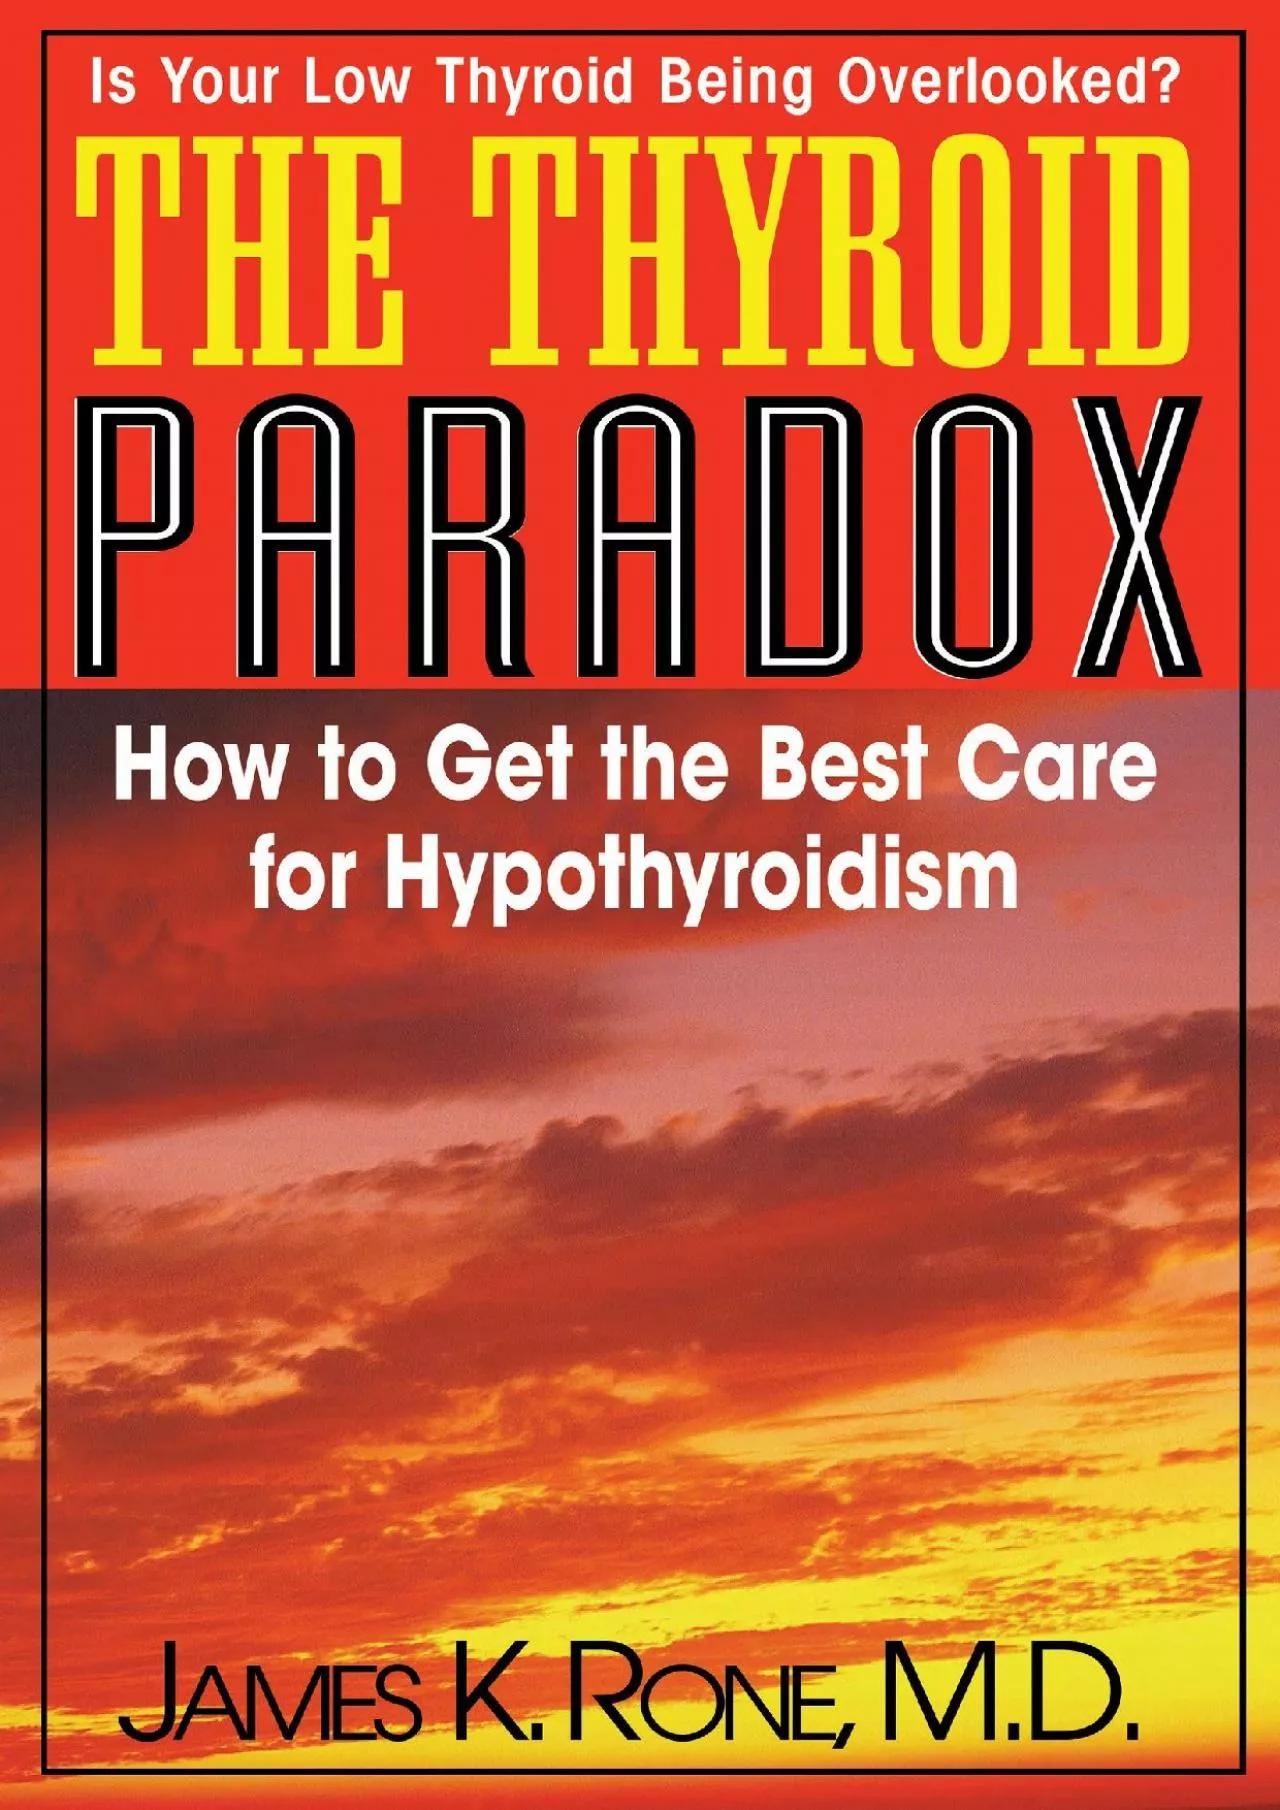 (DOWNLOAD)-The Thyroid Paradox: How to Get the Best Care for Hypothyroidism